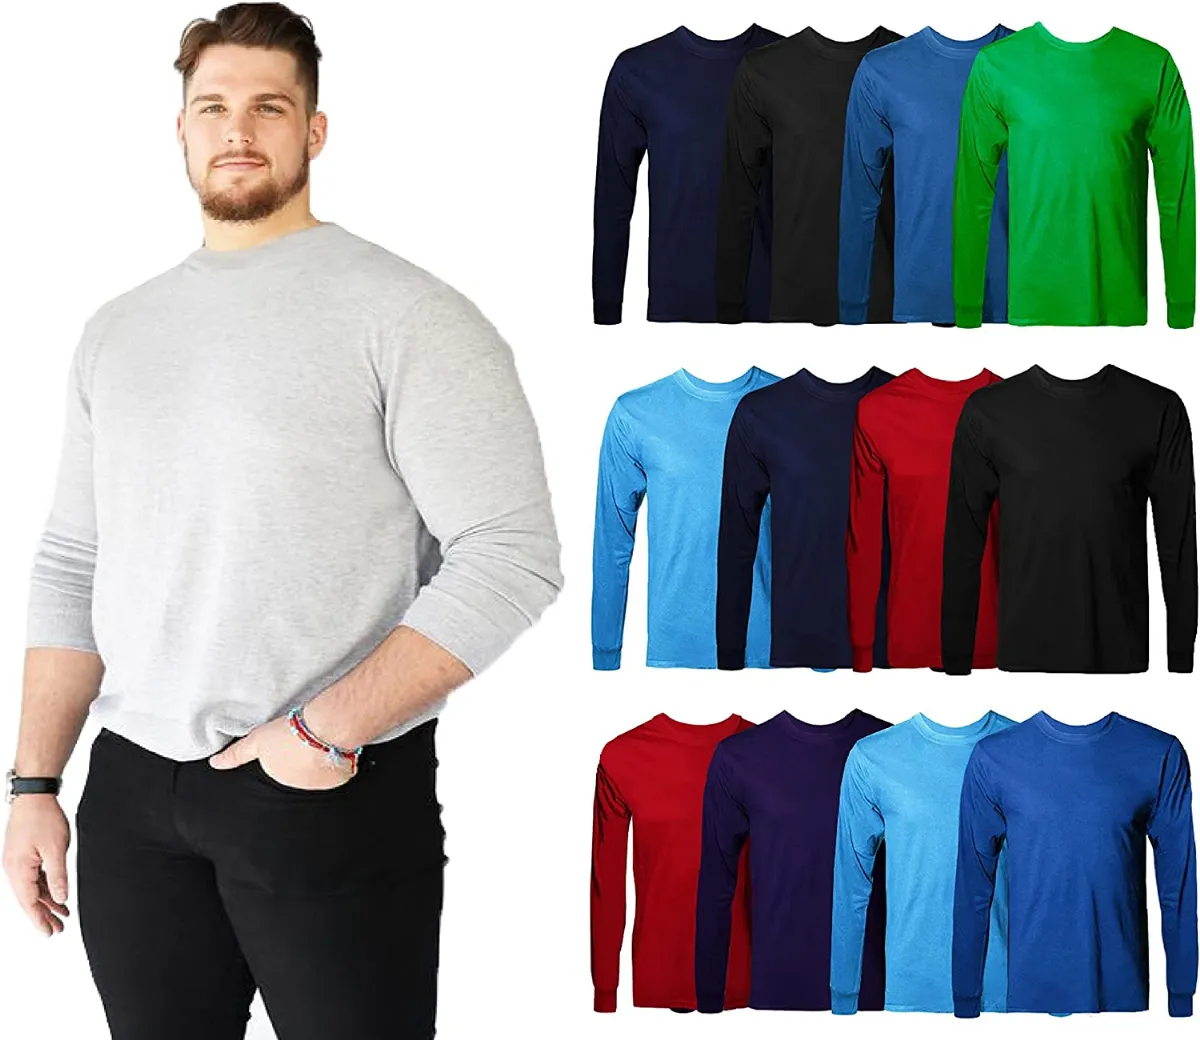 12 Pieces of Mens Cotton Long Sleeve Tee Shirt Assorted Colors Size 4x Large